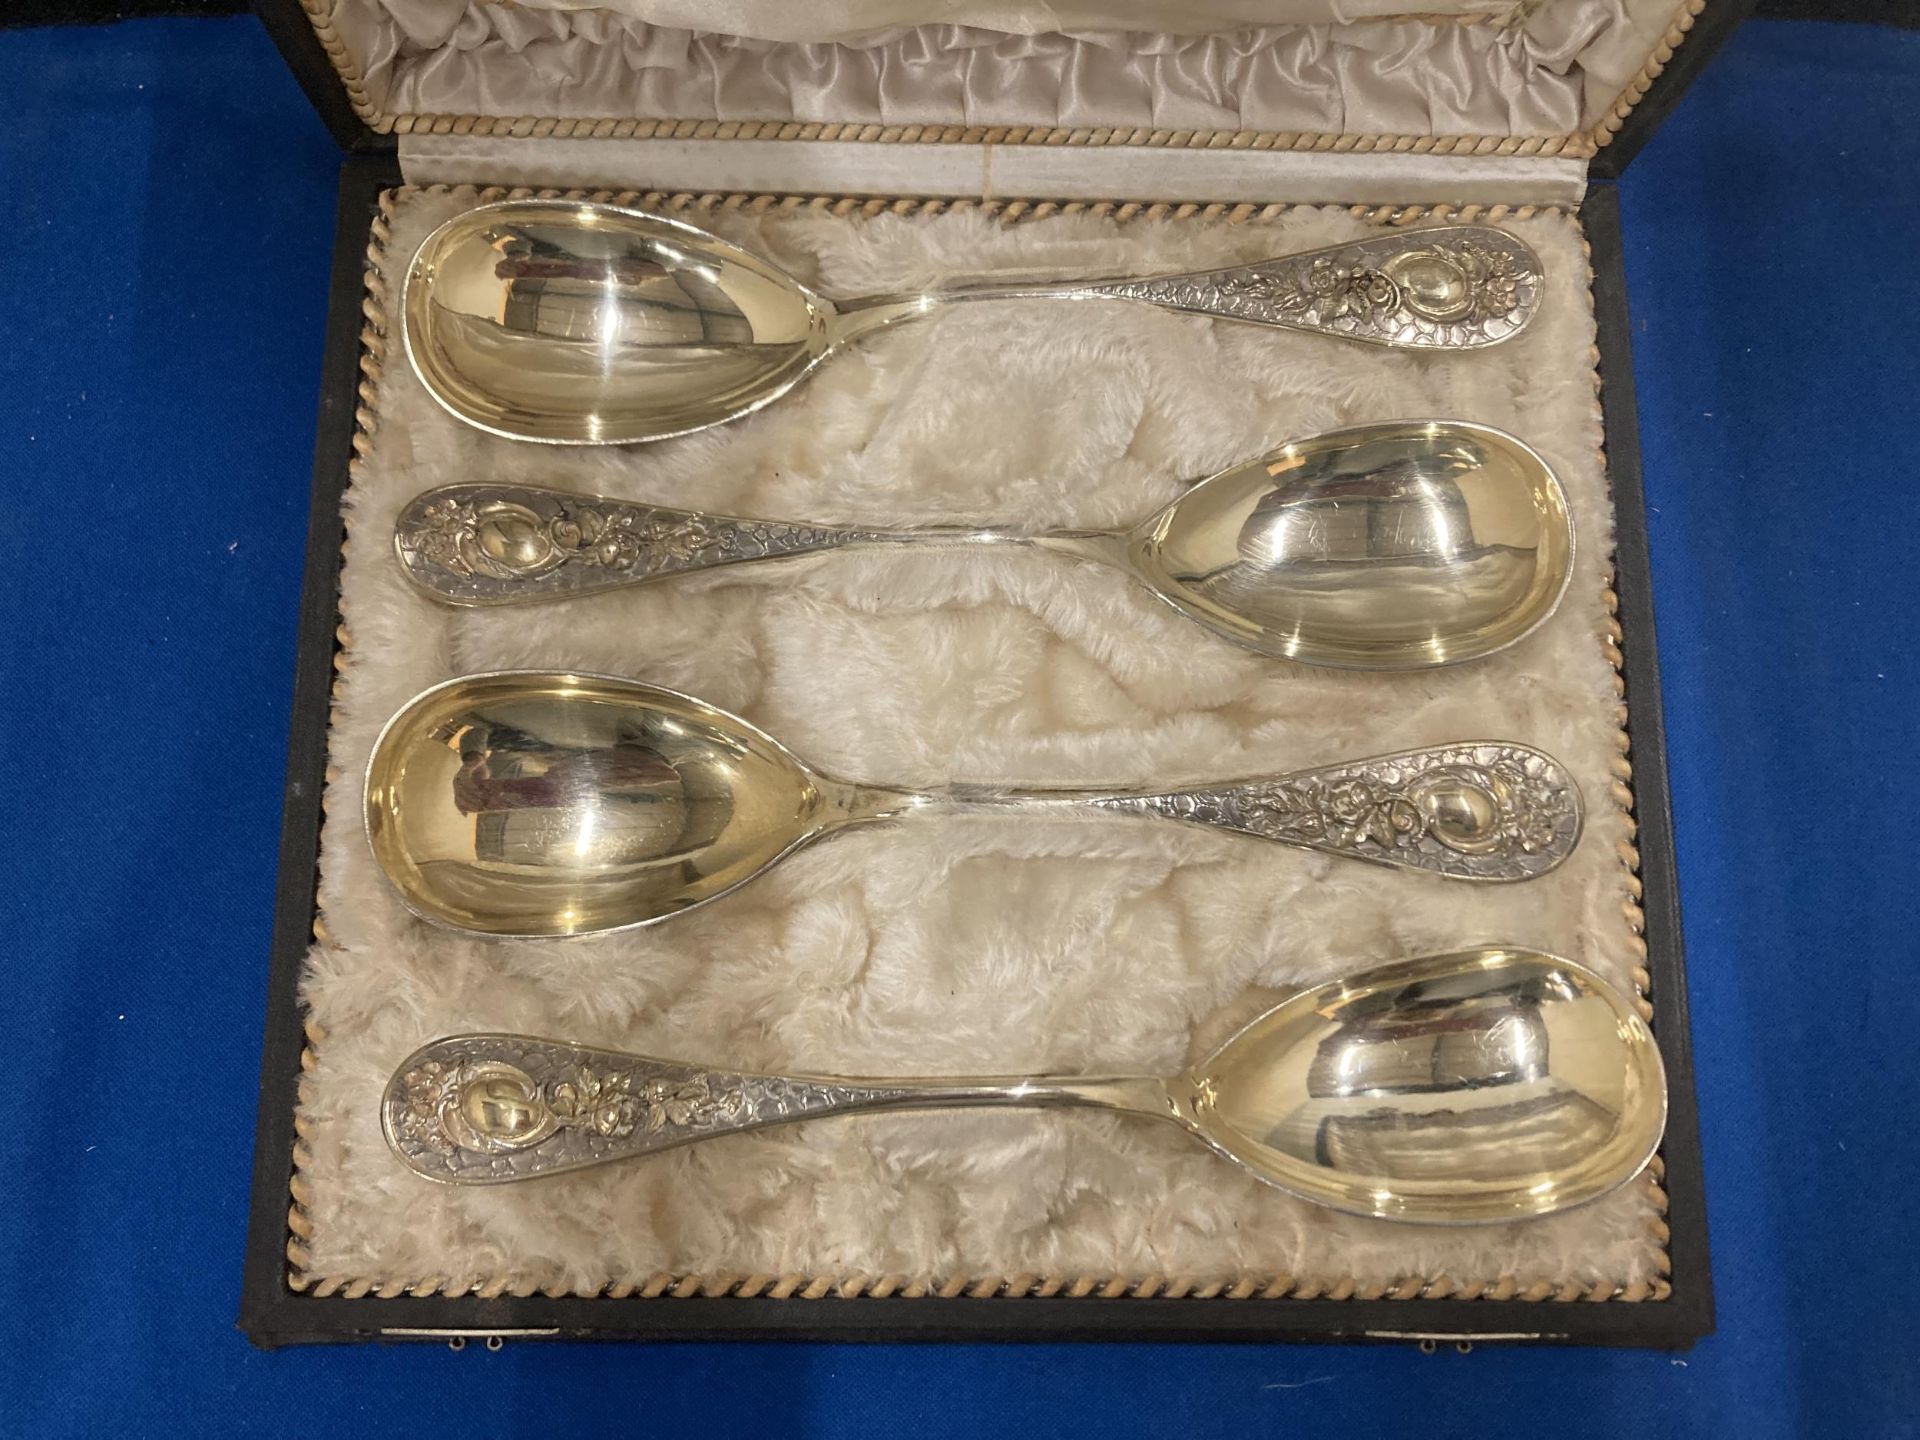 FOUR MARKED 800 DECORATIVE SERVING SPOONS IN ORIGINAL PRESENTATION BOX GEERUDER GREER, JEWELLER IN - Image 2 of 4